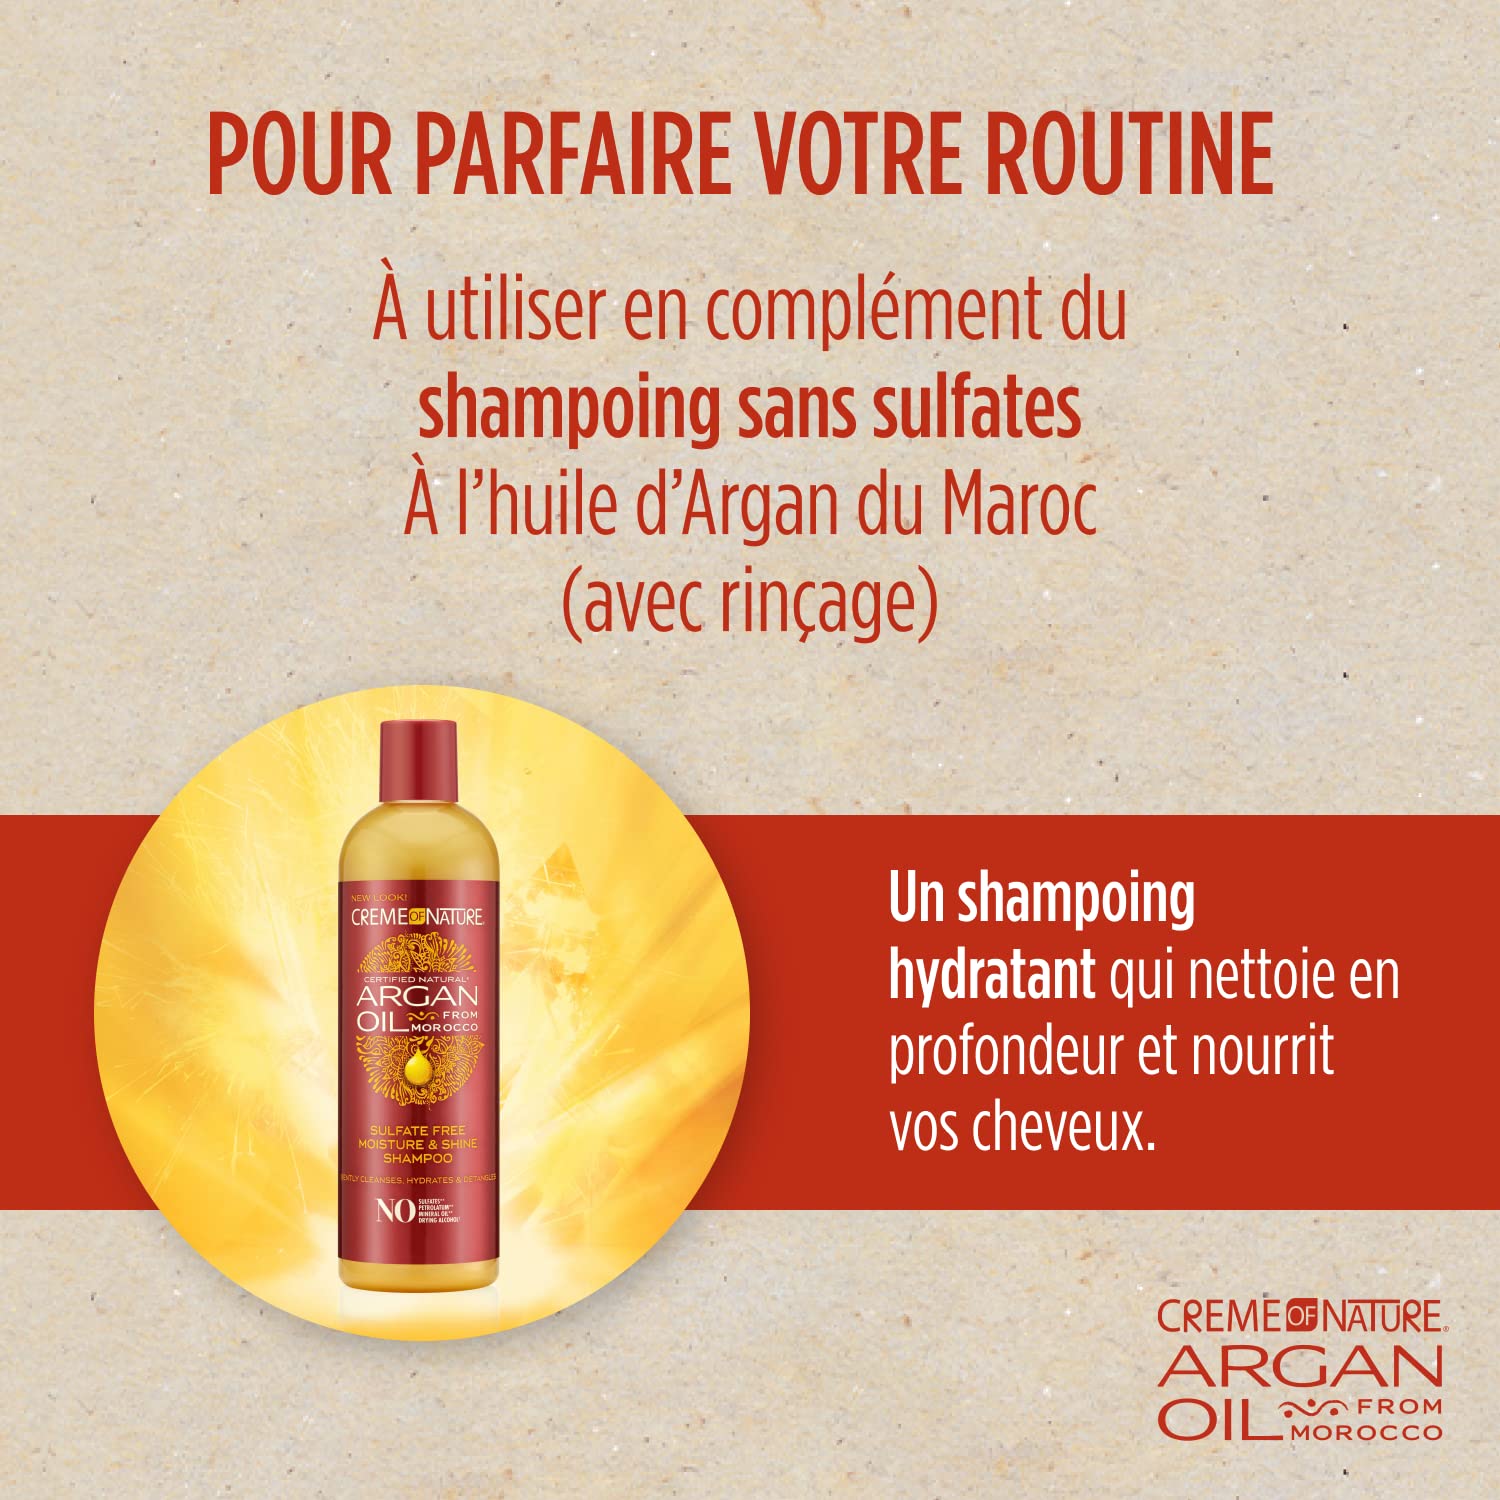 Argan Oil for Hair, Intensive Conditioning Treatment by Creme of Nature, Argan Oil of Morocco, Moisturizing Hair Care, 12 Fl Oz